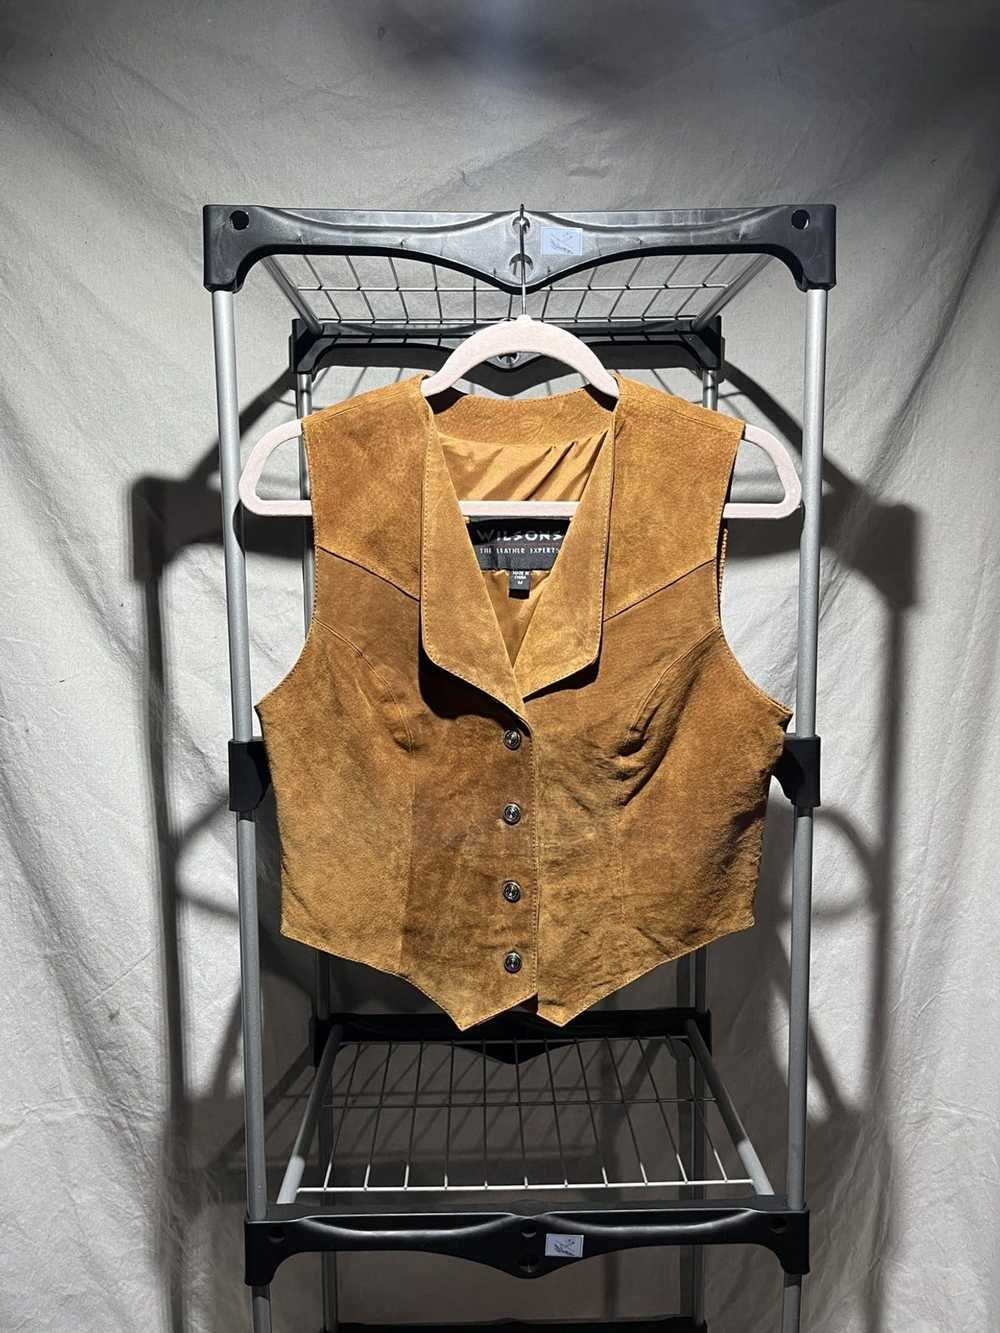 Wilsons Leather Wilson’s Leather suede vest - image 1